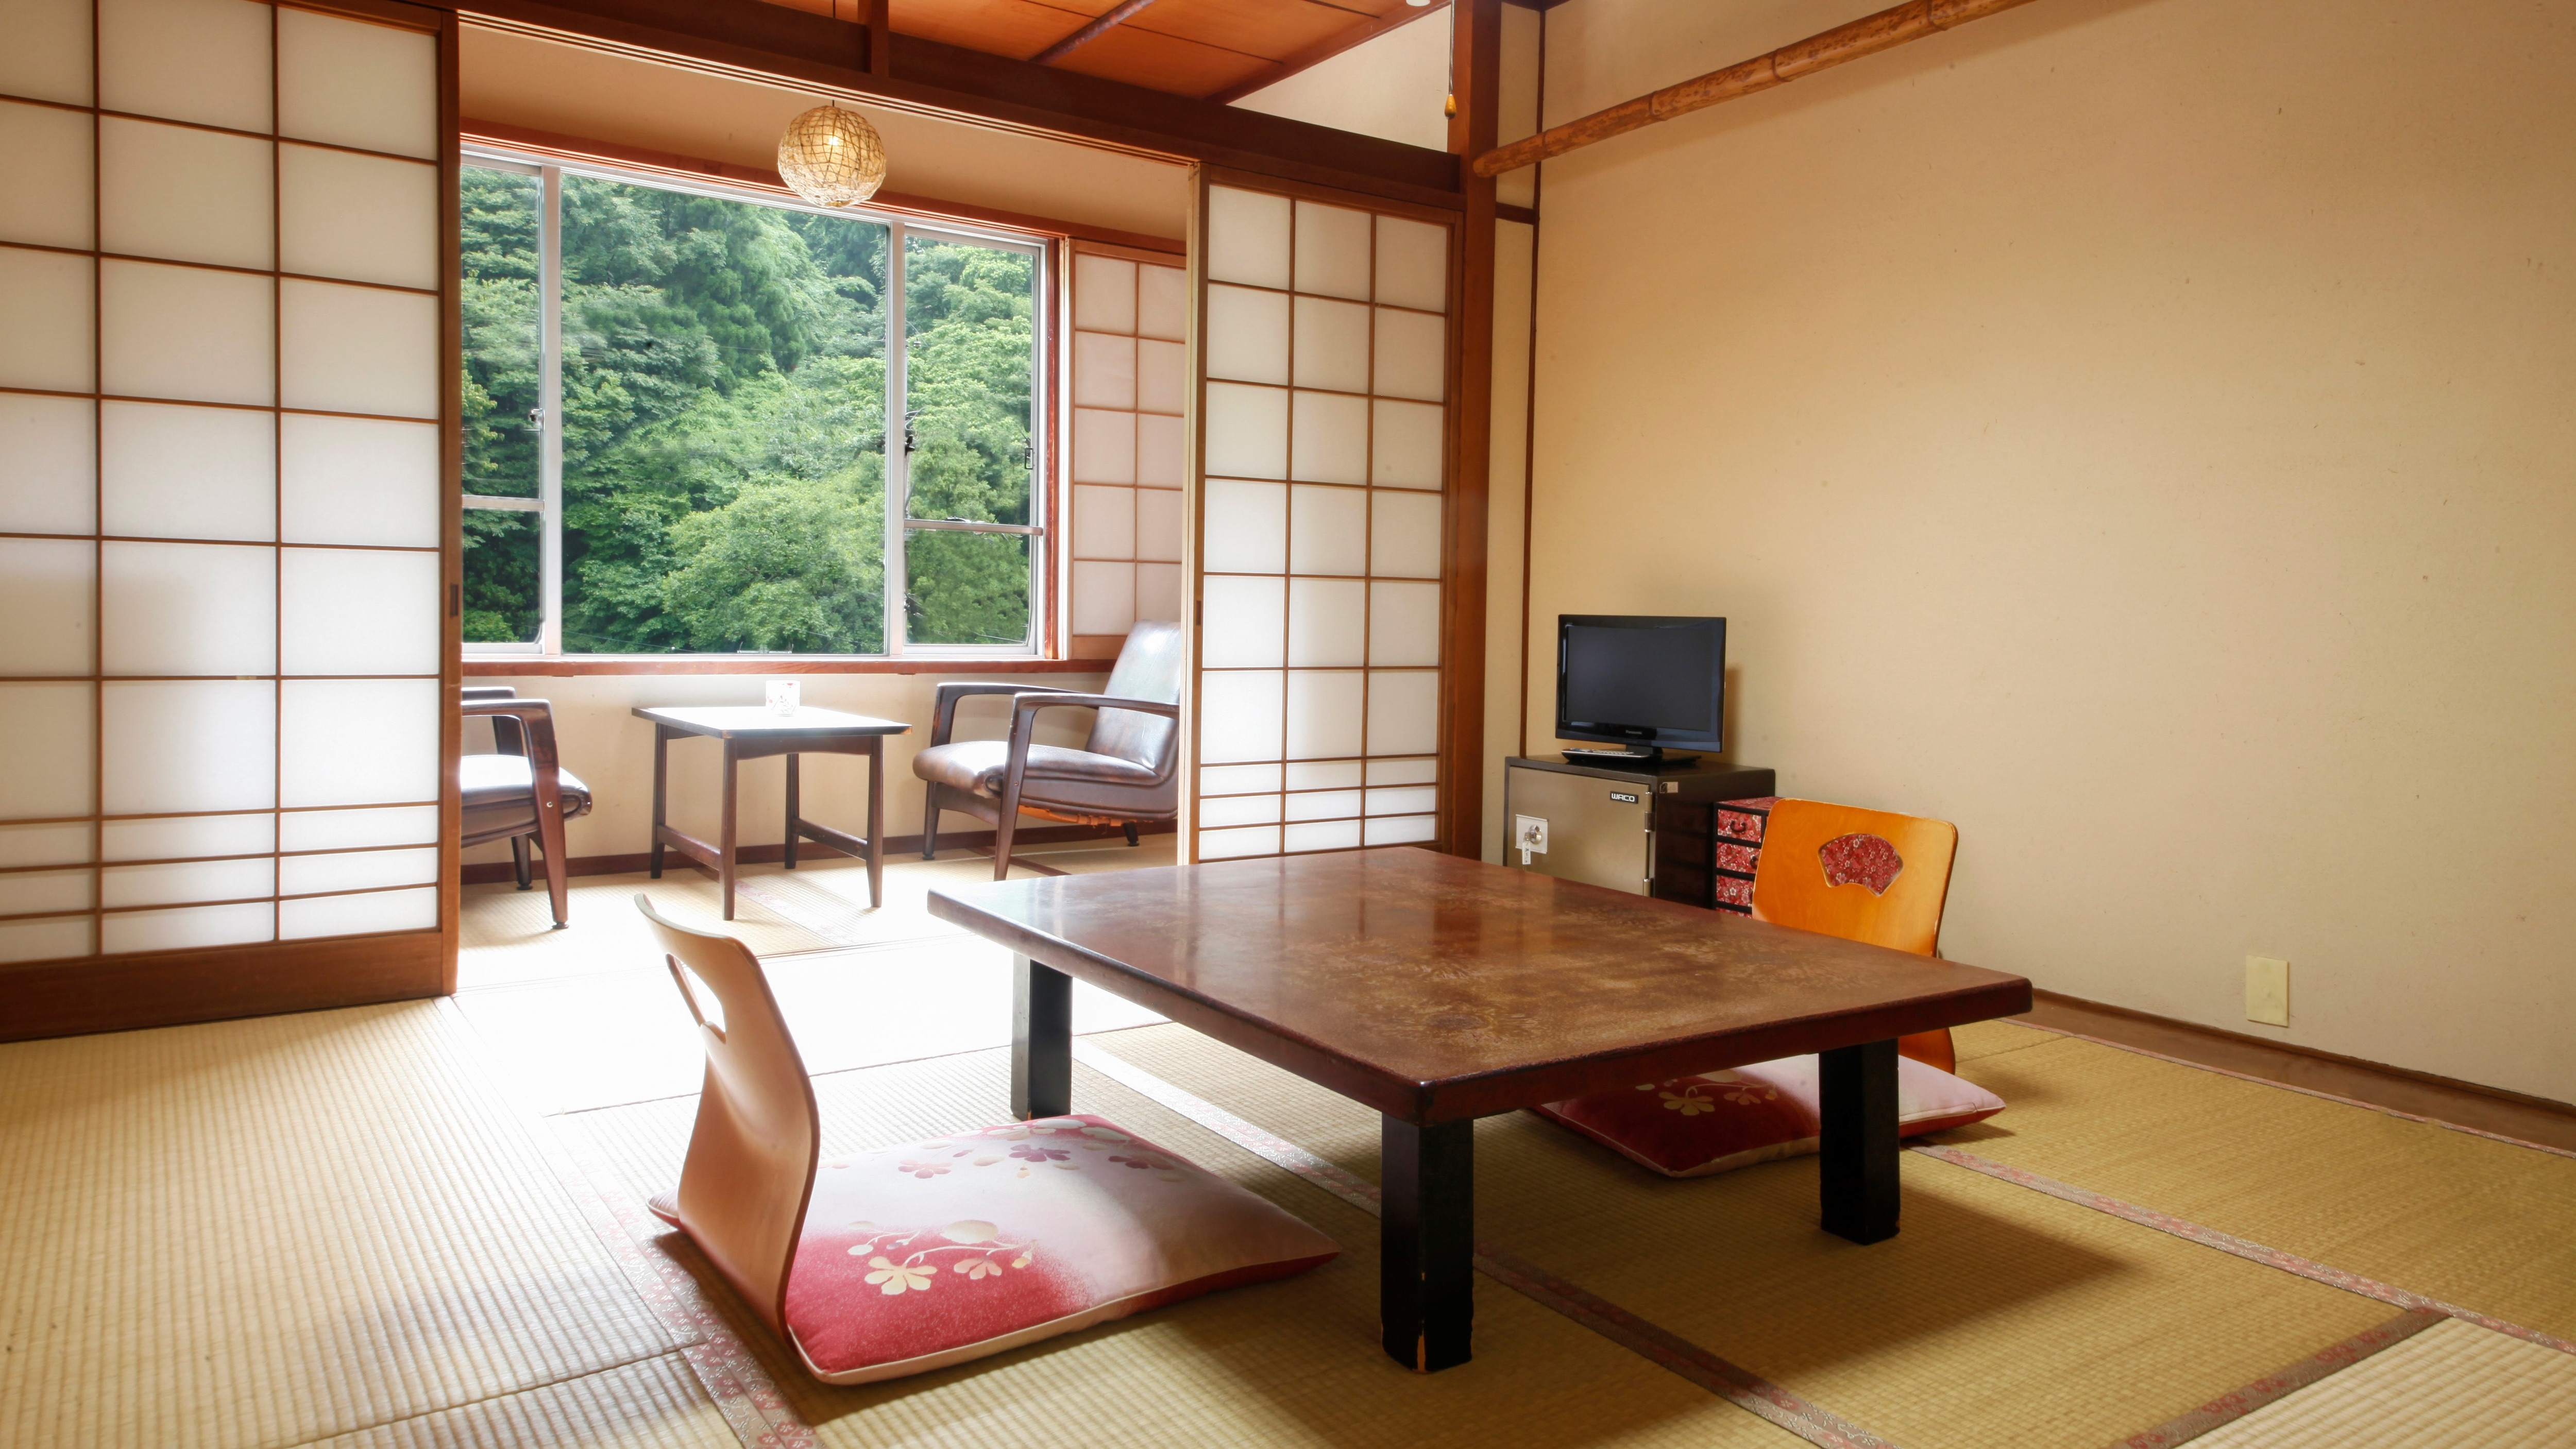 Japanese-style room 10 tatami mats (with wide rim)